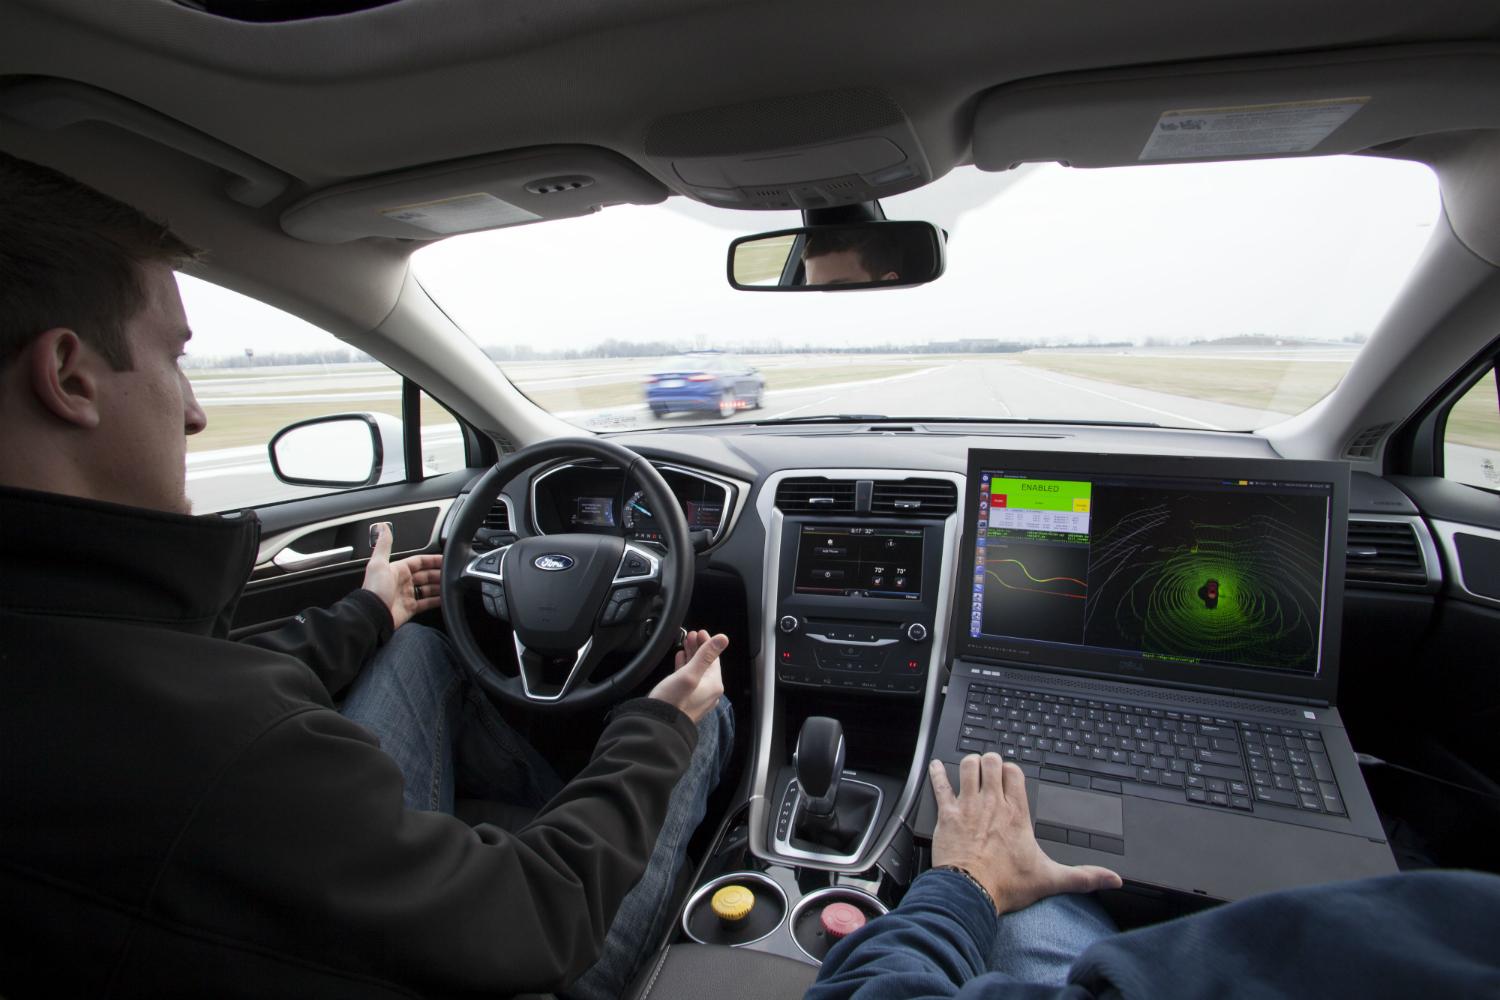 ford releases fusion hybrid research vehicle will explore autonomous driving tech 2